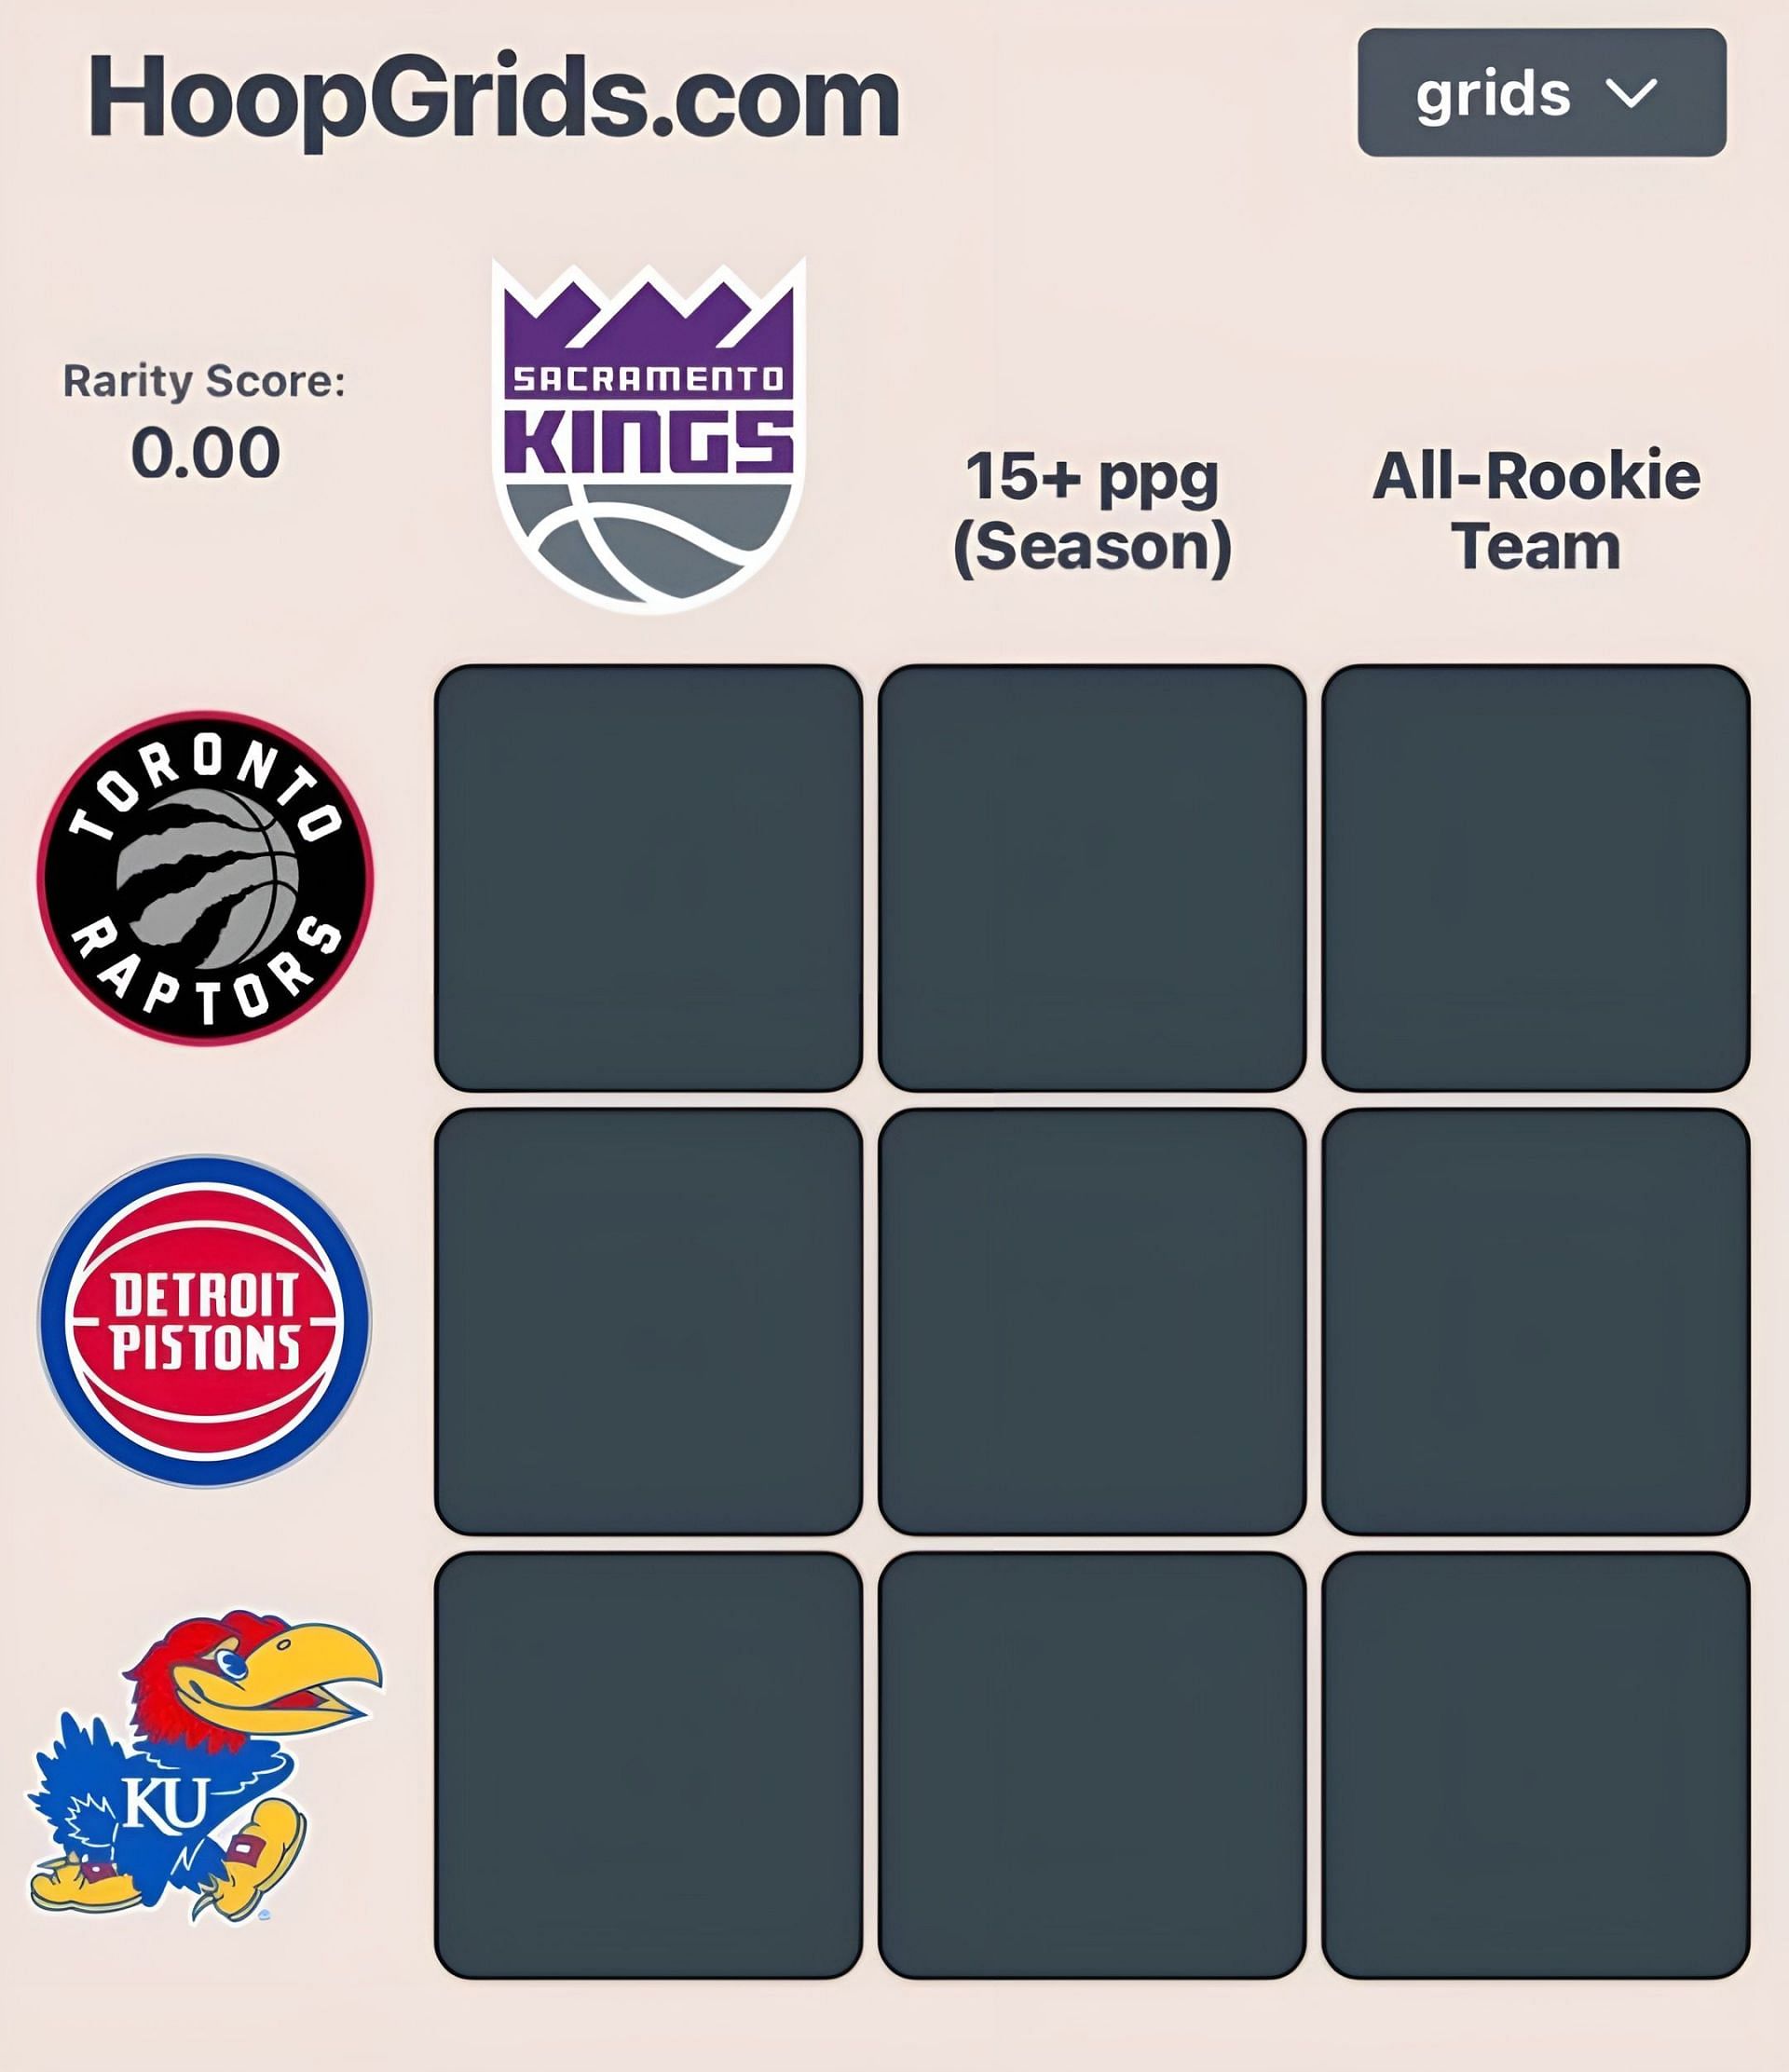 Which of Vince Carter's teammates played for the Kings and won 55 games in  a season? NBA HoopGrids answers for August 10